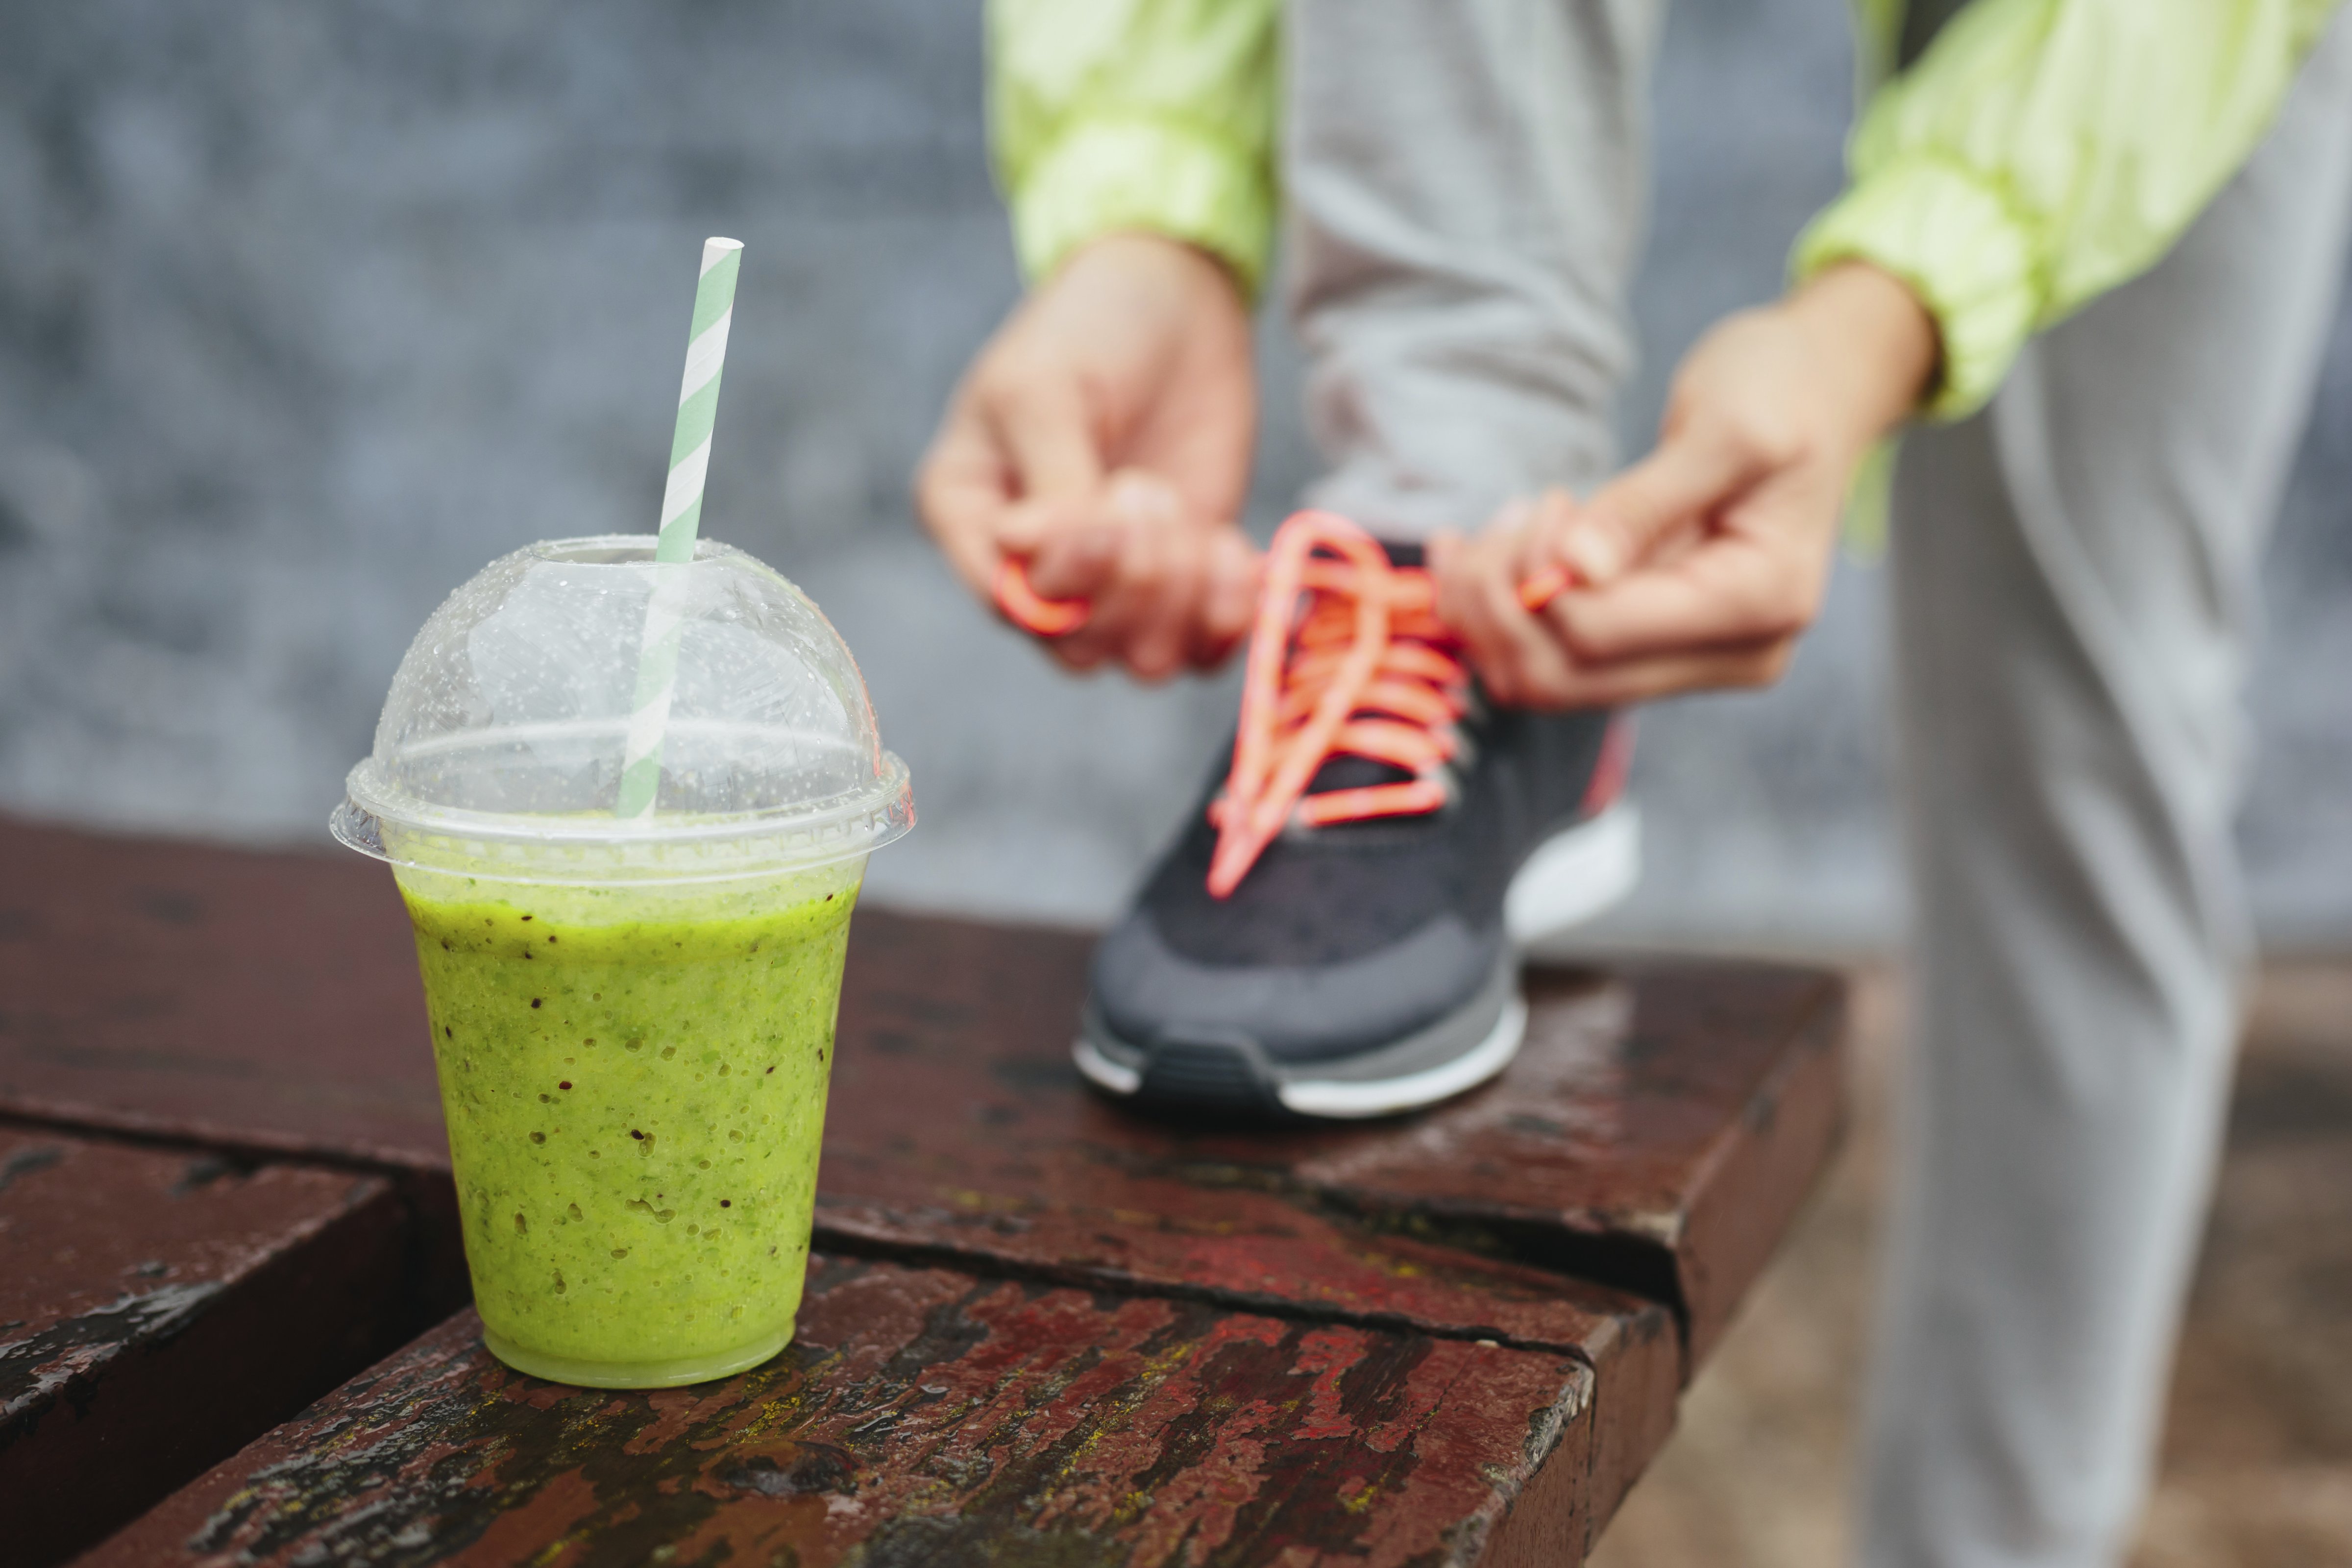 exercise-running-shoes-smoothie